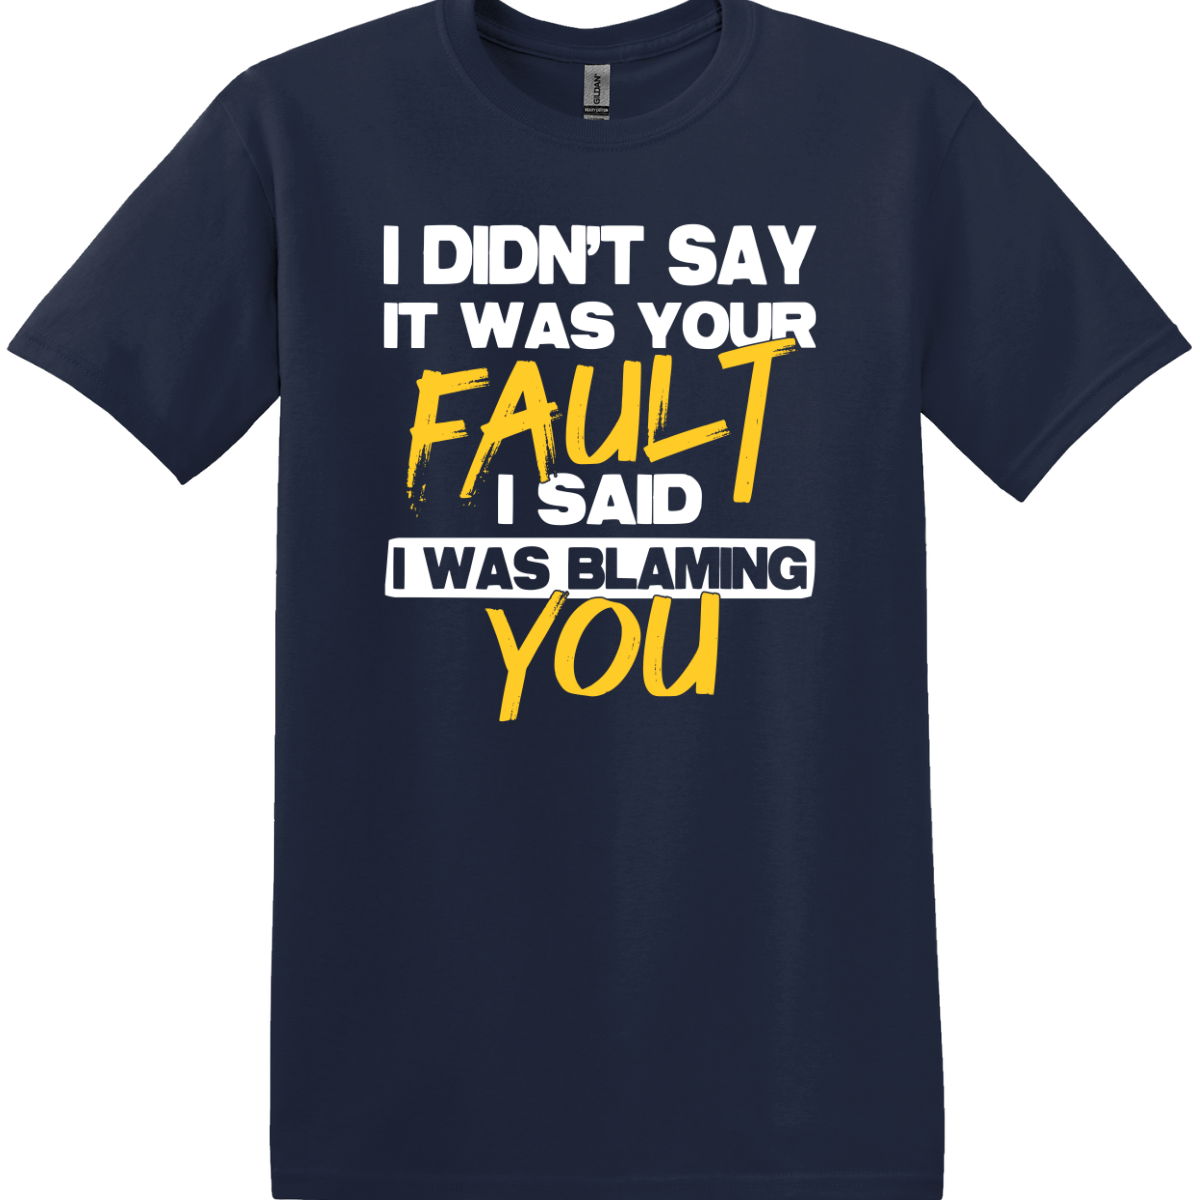 I Didn't Say It Was Your Fault I Said I Was Blaming You Tee